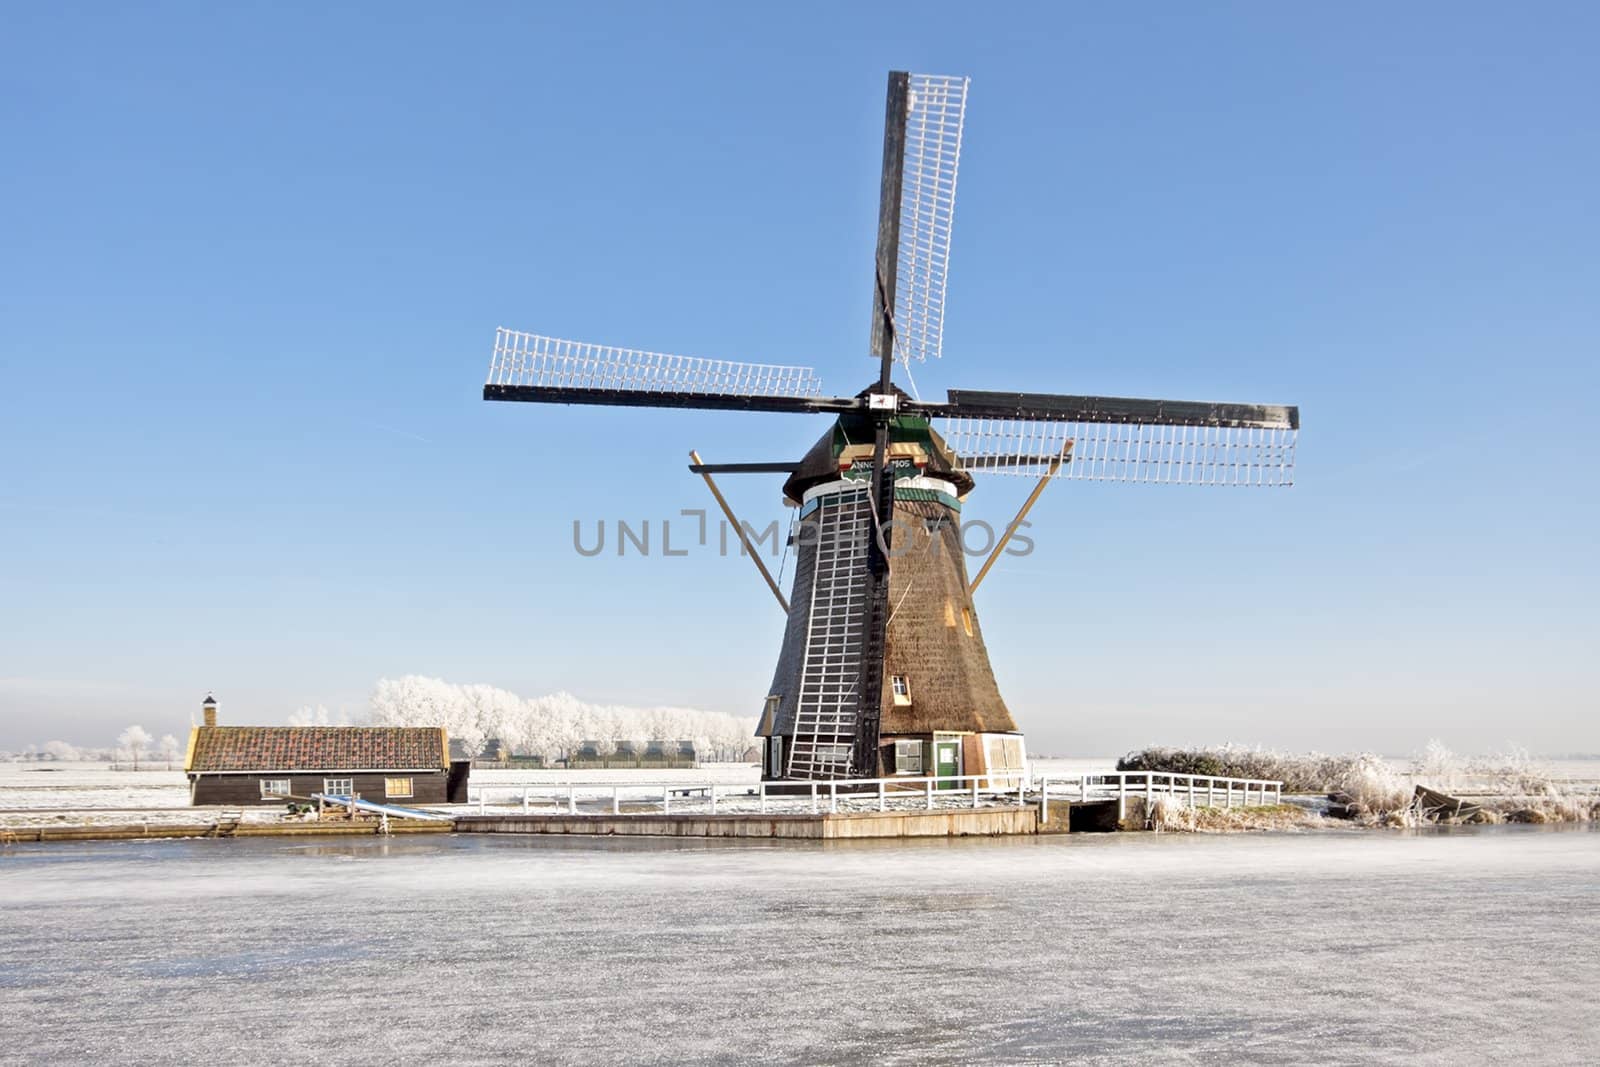 Windmill from 1803 in wintertime in the Netherlands   by devy